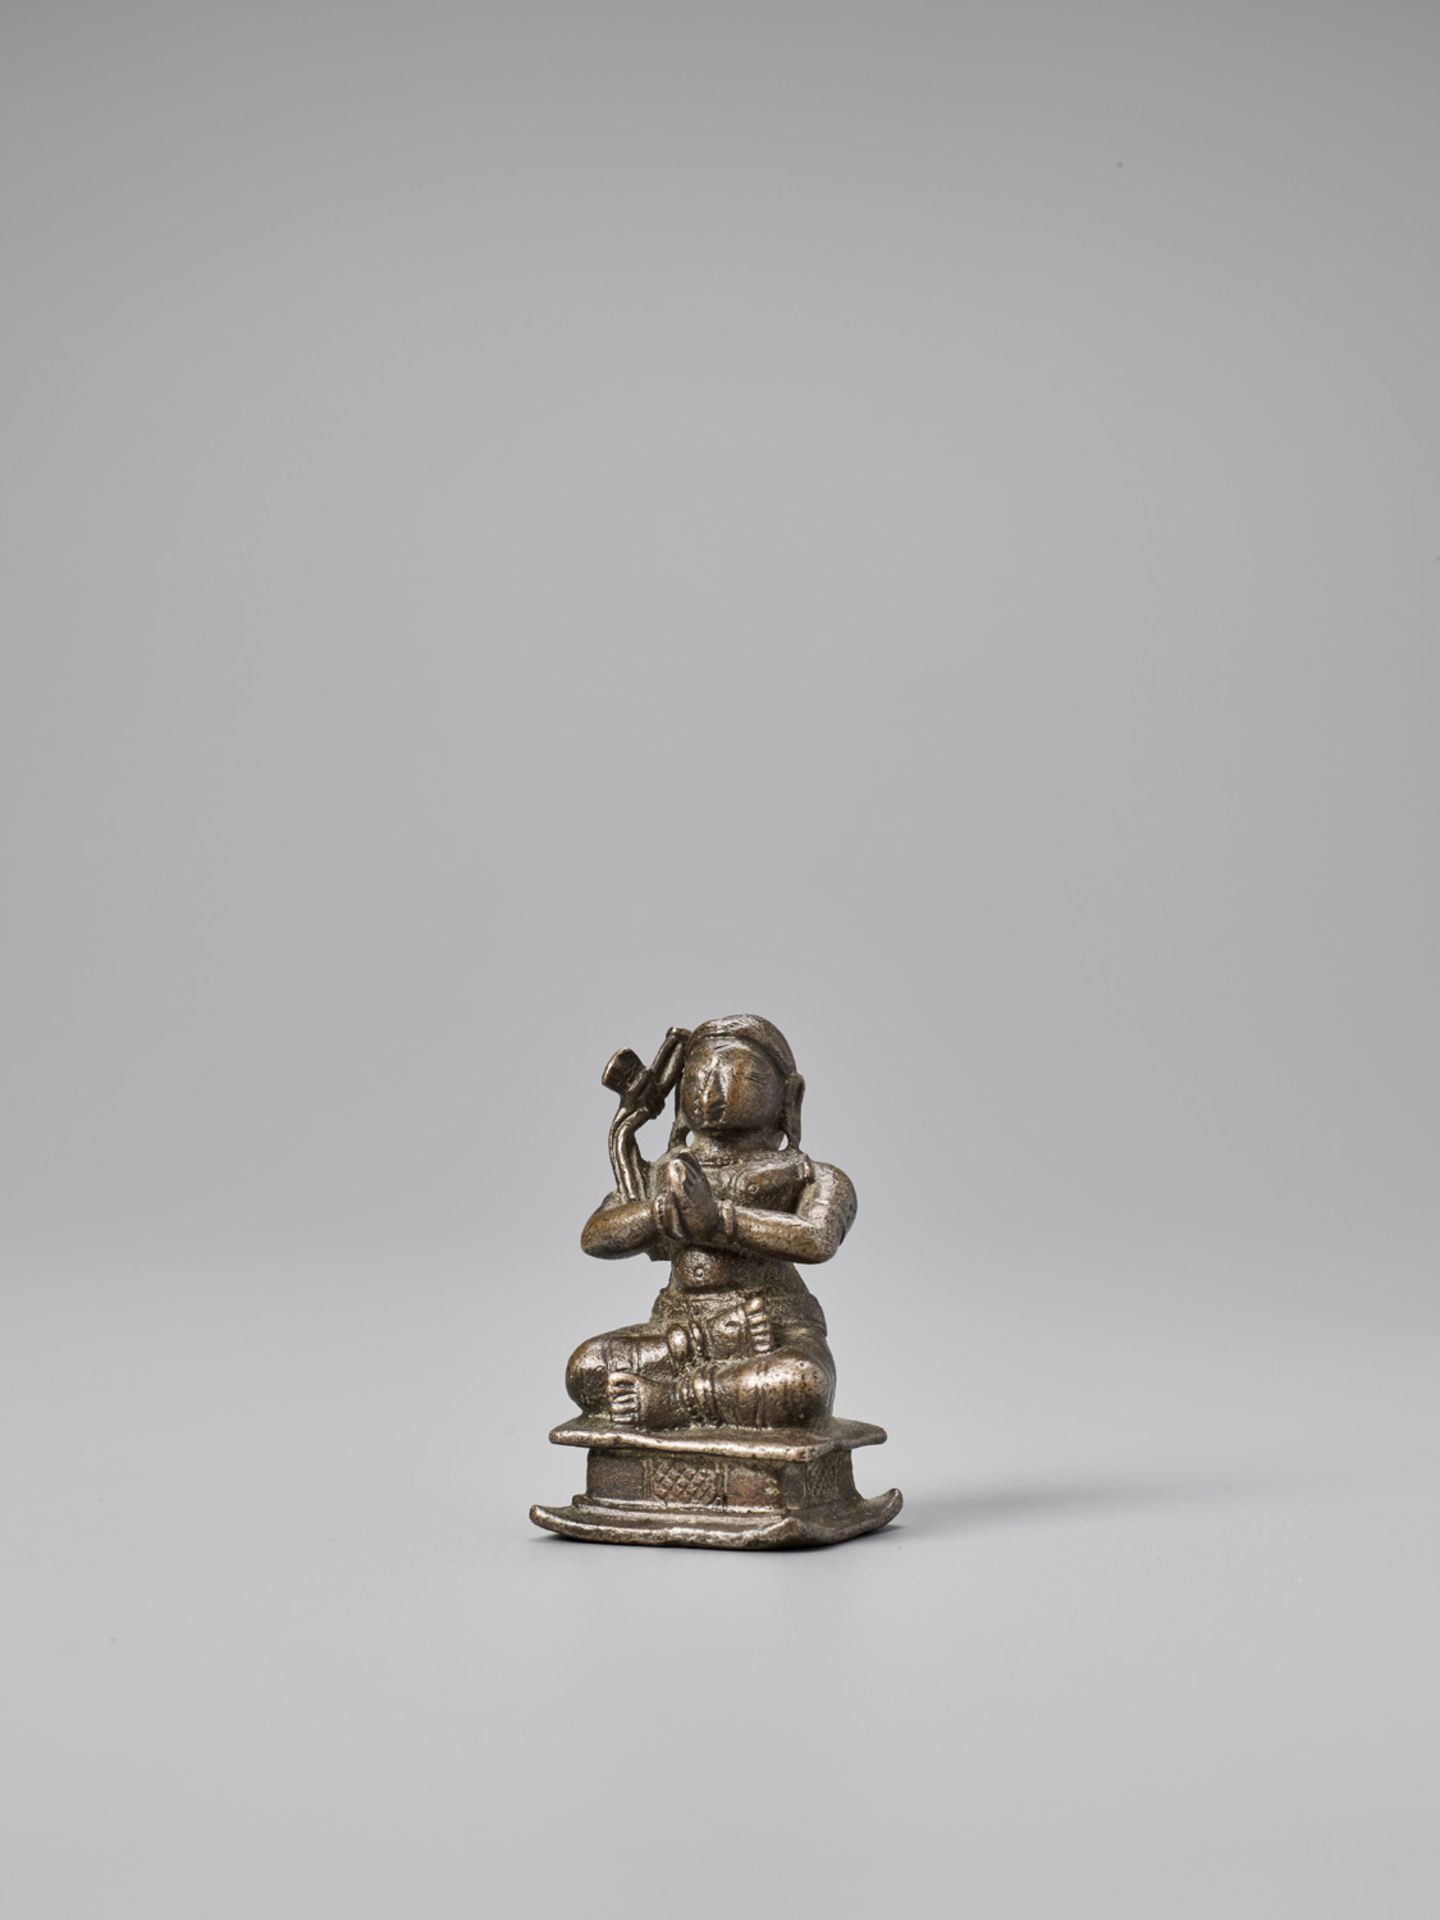 TWO SMALL INDIAN BRONZE FIGURES, 19TH CENTURY - Image 6 of 10